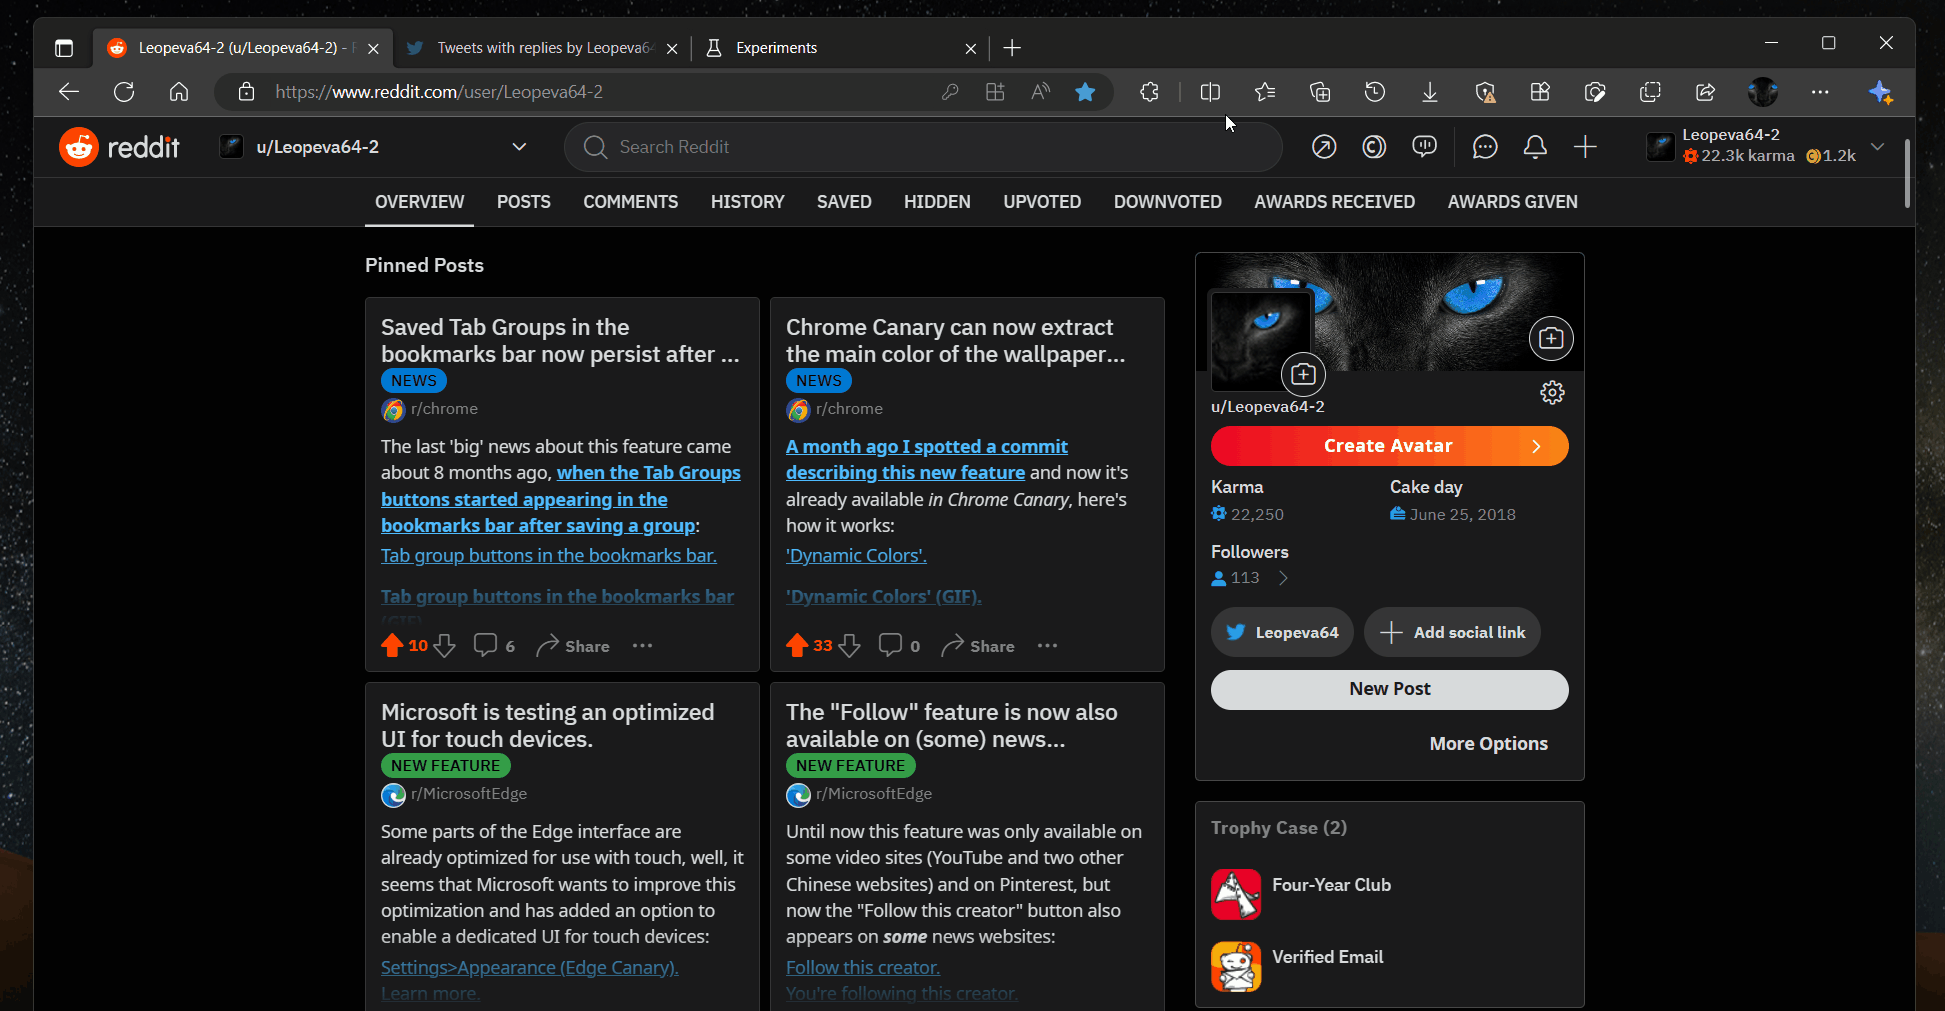 Microsoft Edge tabs in a new side-by-side view.